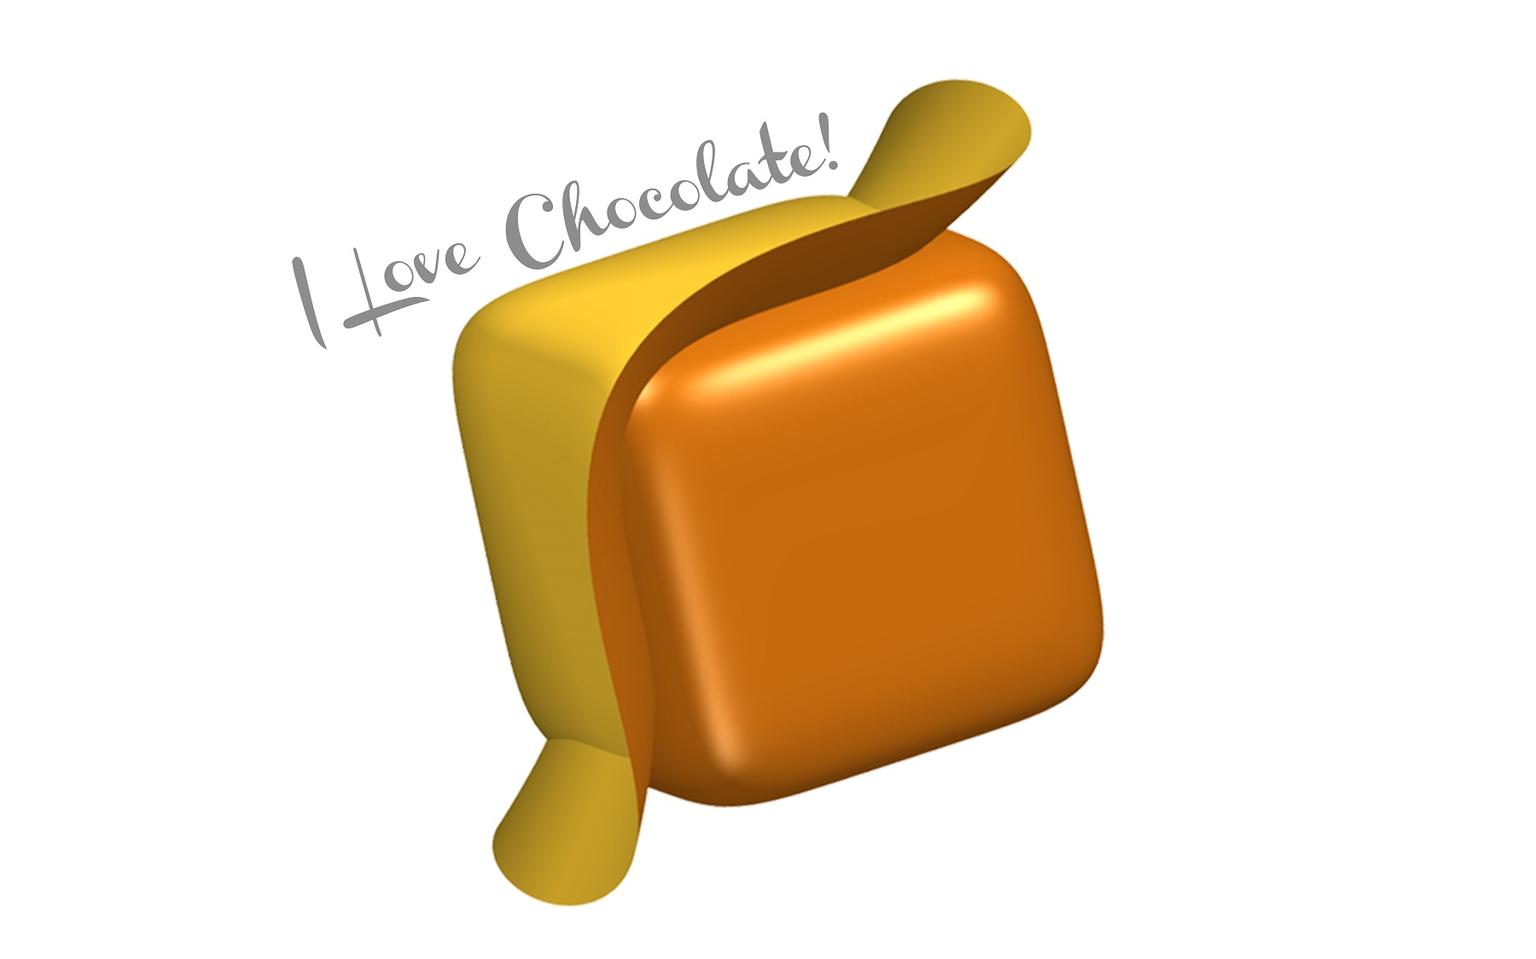 Image for entry 'I Love Chocolate!'